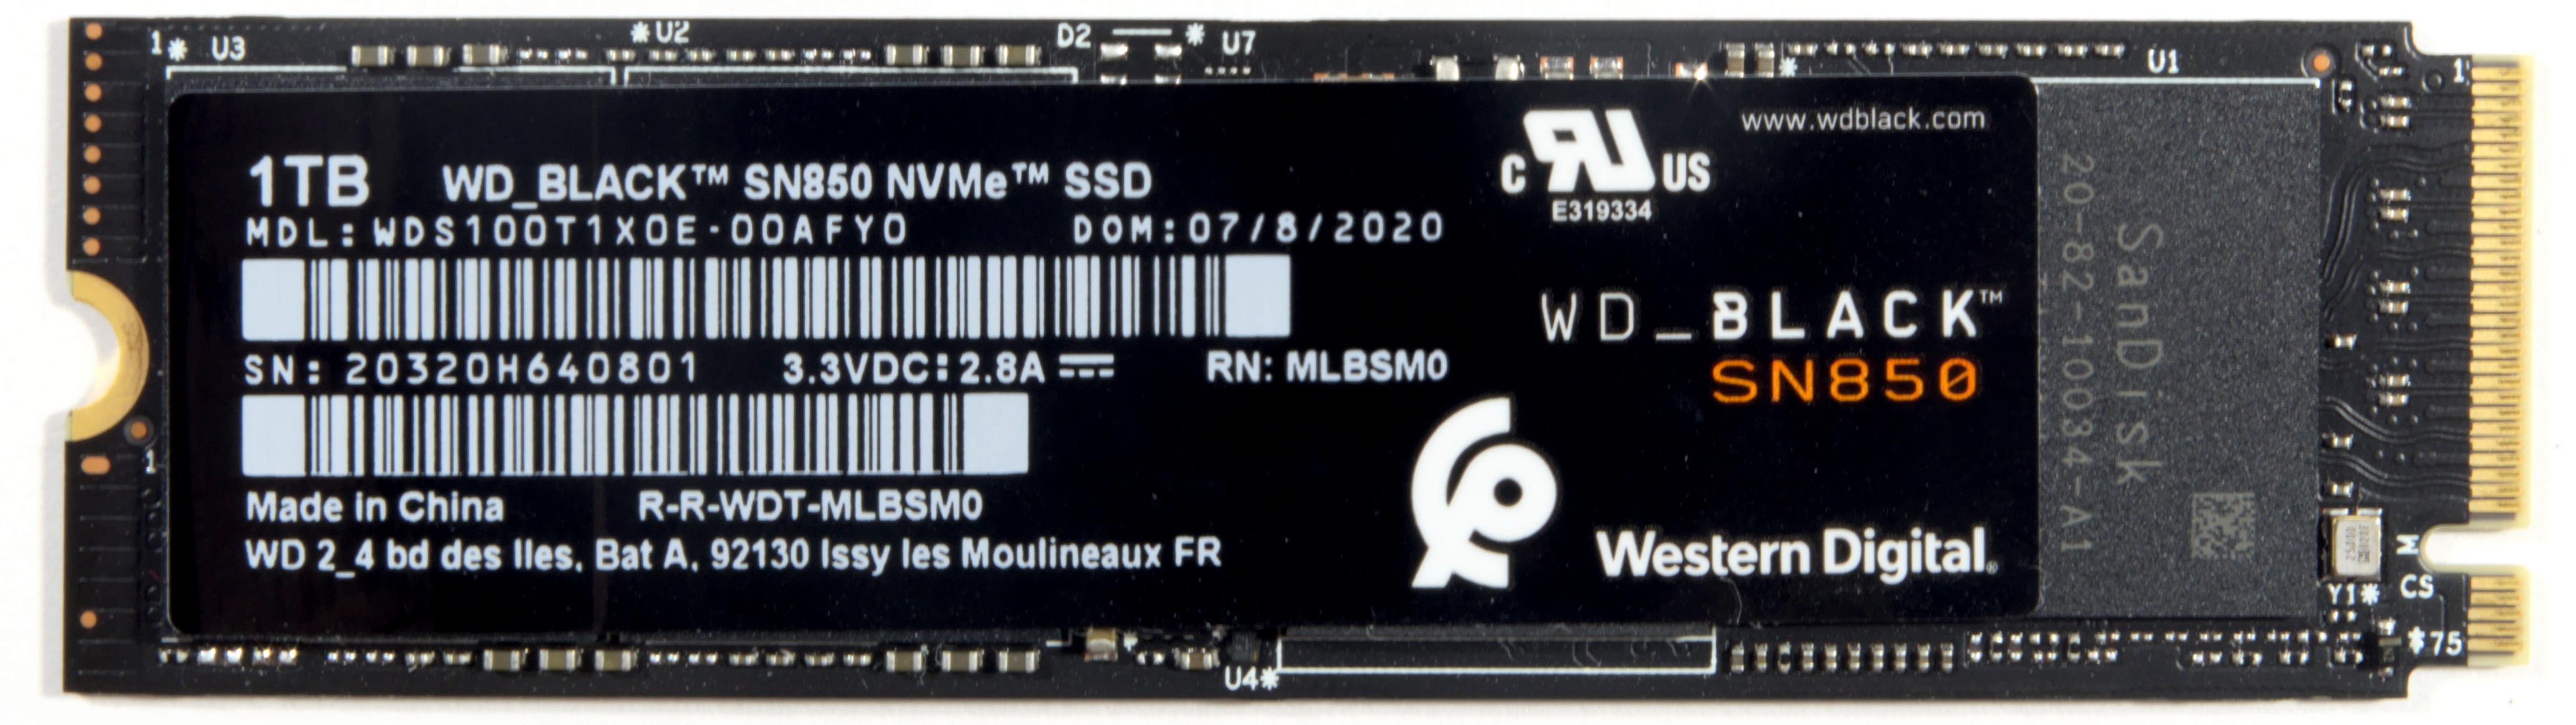 The Western Digital Wd Black Sn850 Review A Very Fast Pcie 4 0 Ssd